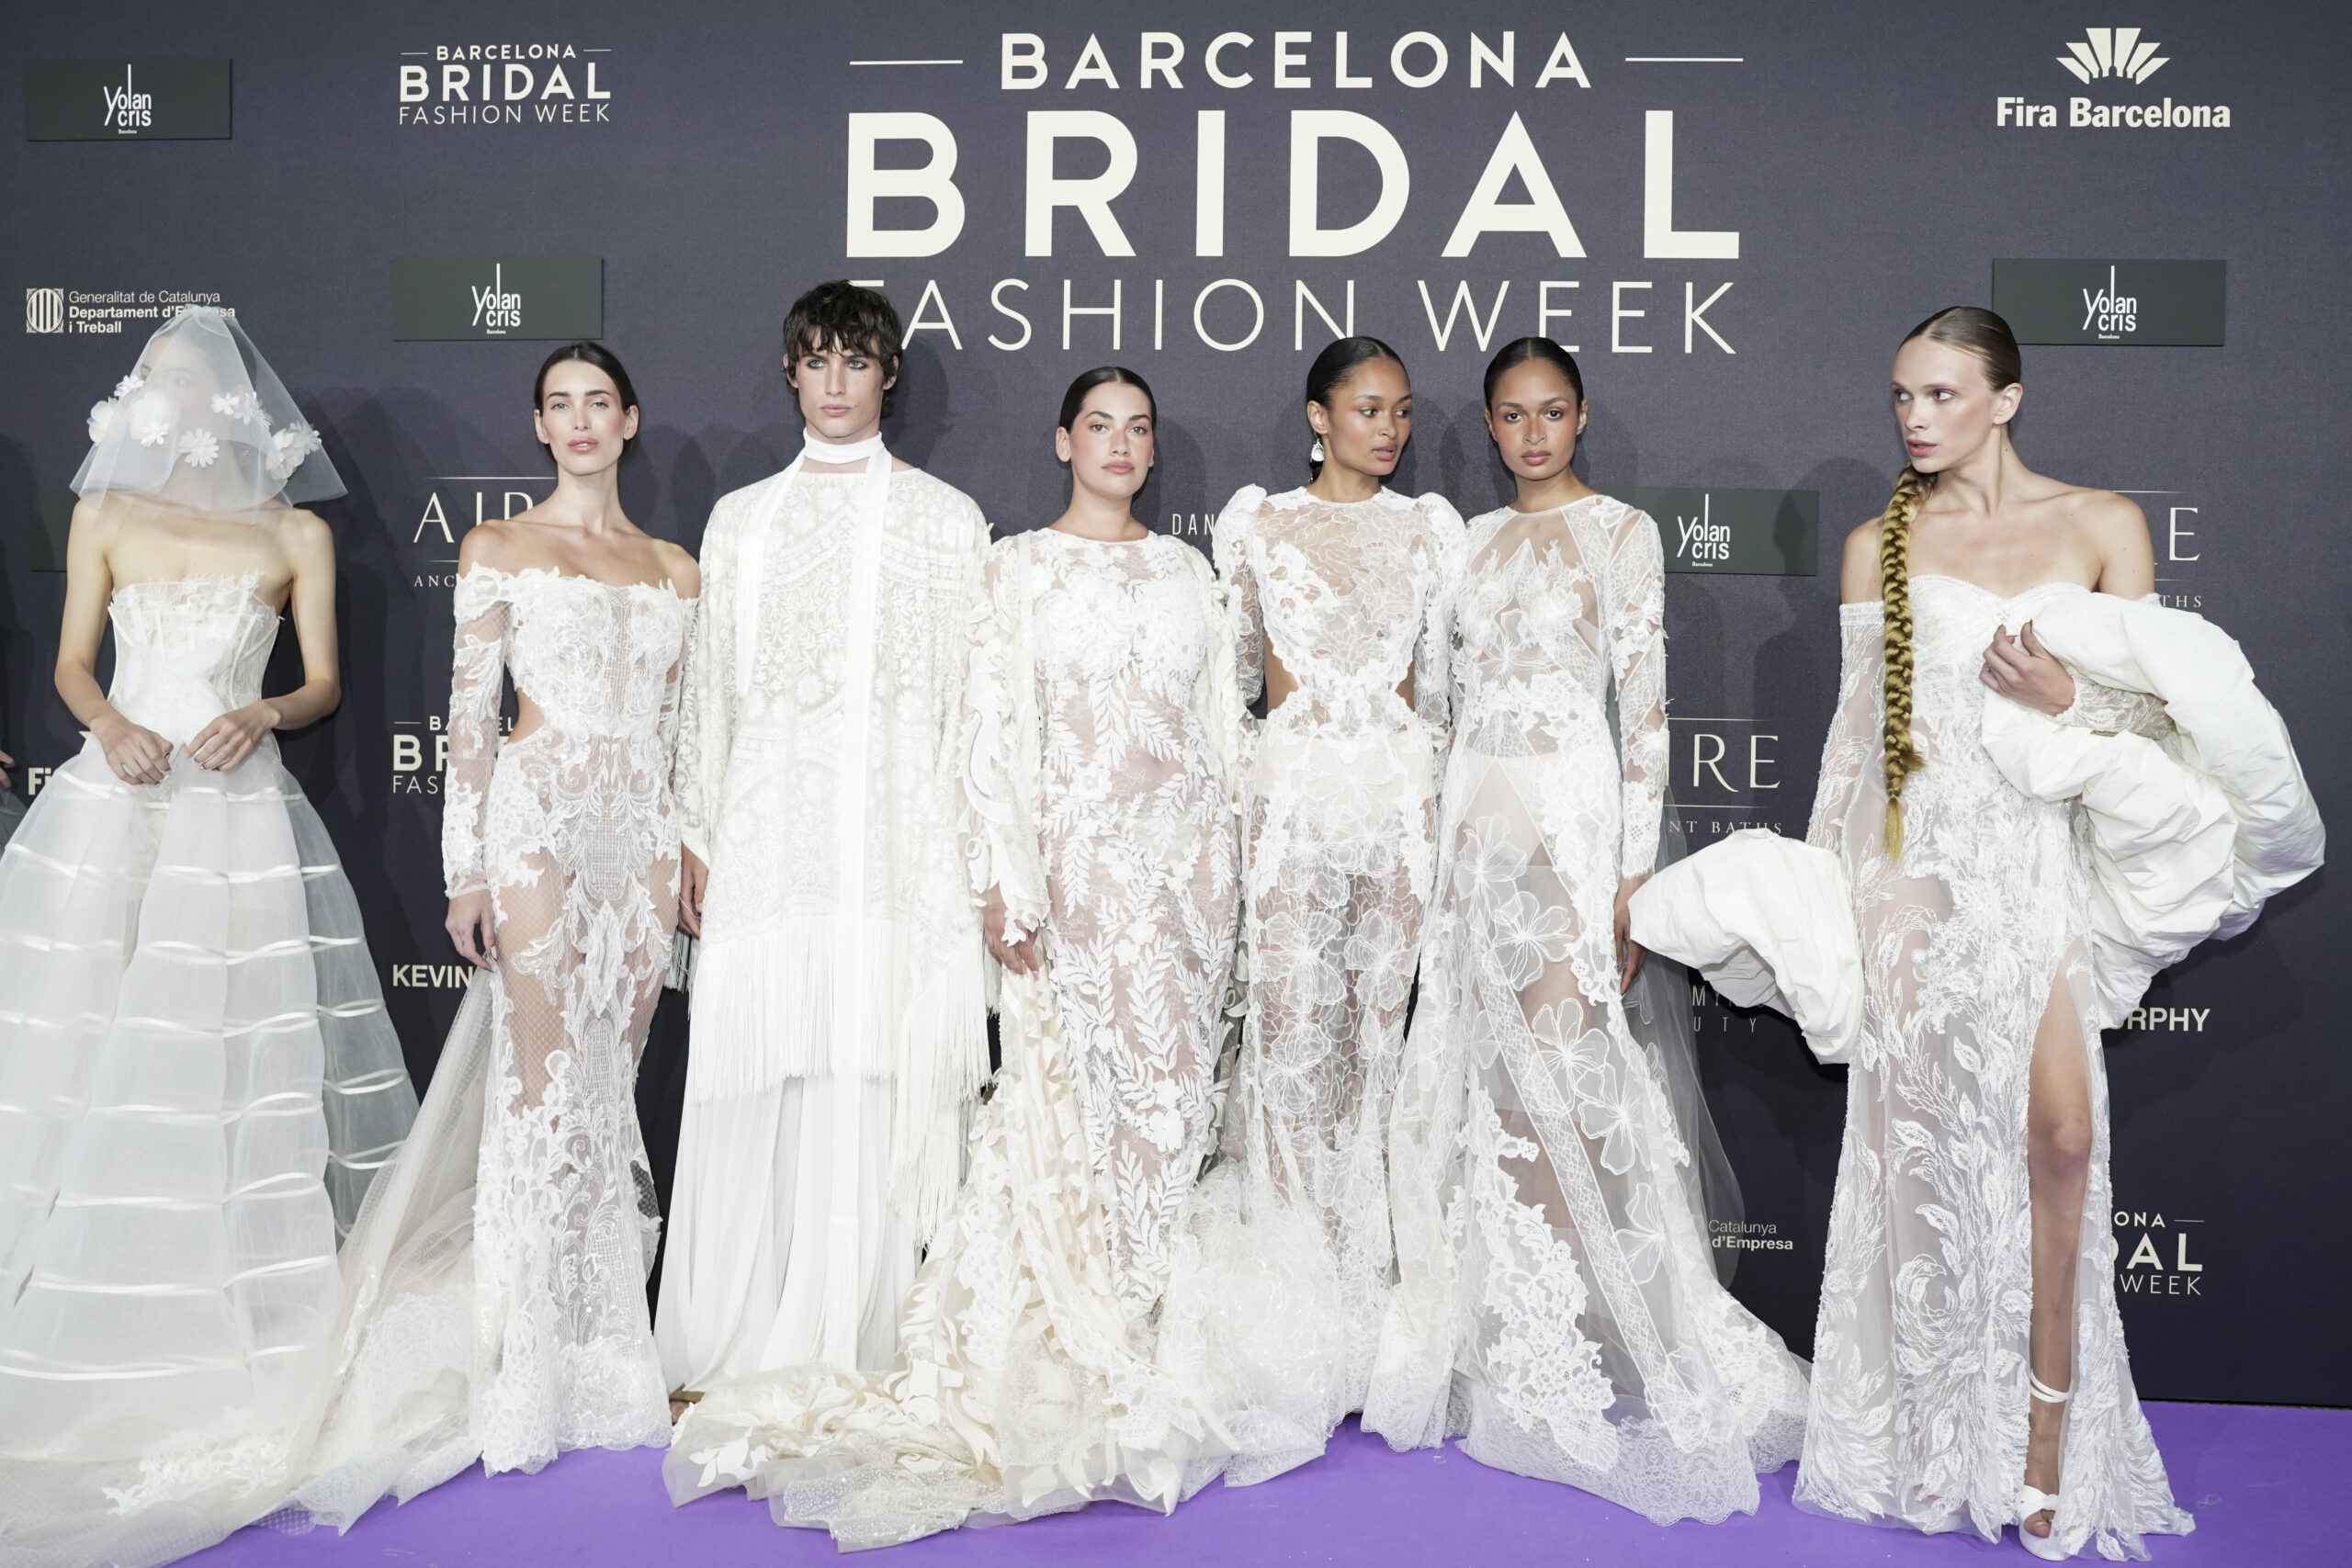 From Runways to Fittings: My Journey at Barcelona Bridal Fashion